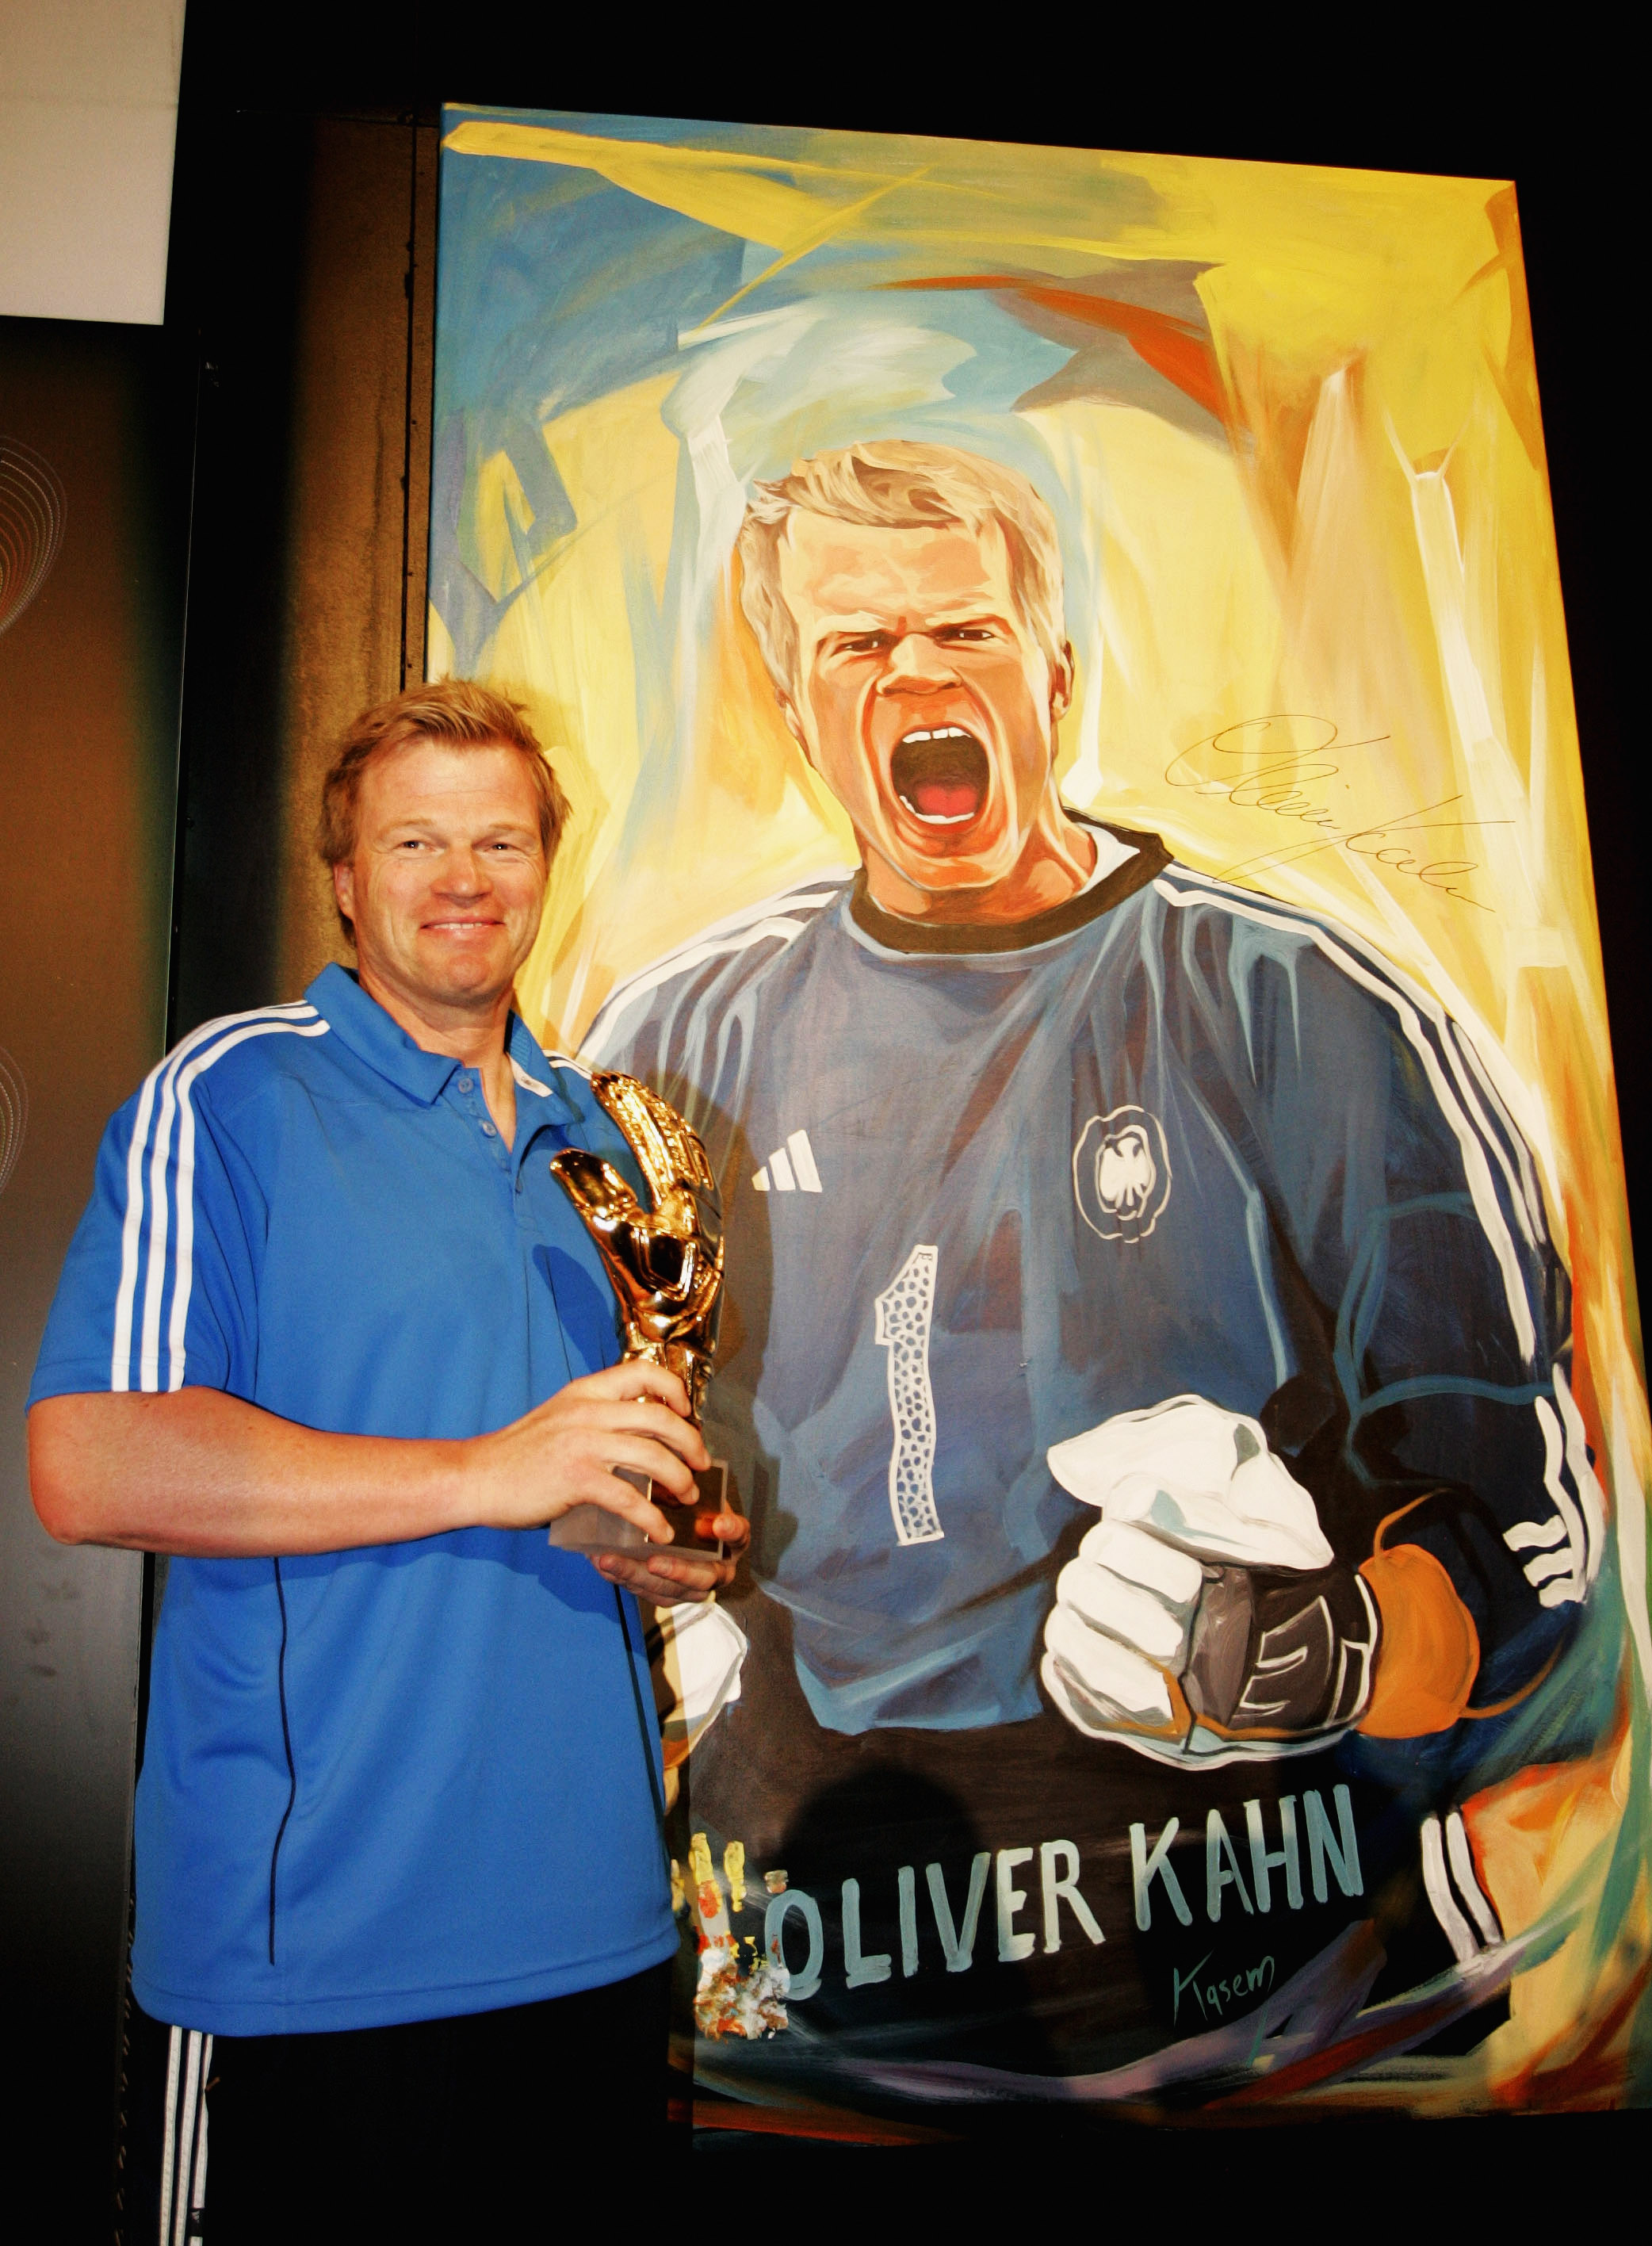 SANDTON, SOUTH AFRICA - JUNE 25:  Oliver Kahn poses in front of a portrait of himself to be auctioned, during the adidas Penalty Day at the Jo'bulani Centre on June 25, 2010 in Sandton, South Africa.  (Photo by Dominic Barnardt/Getty Images for adidas)